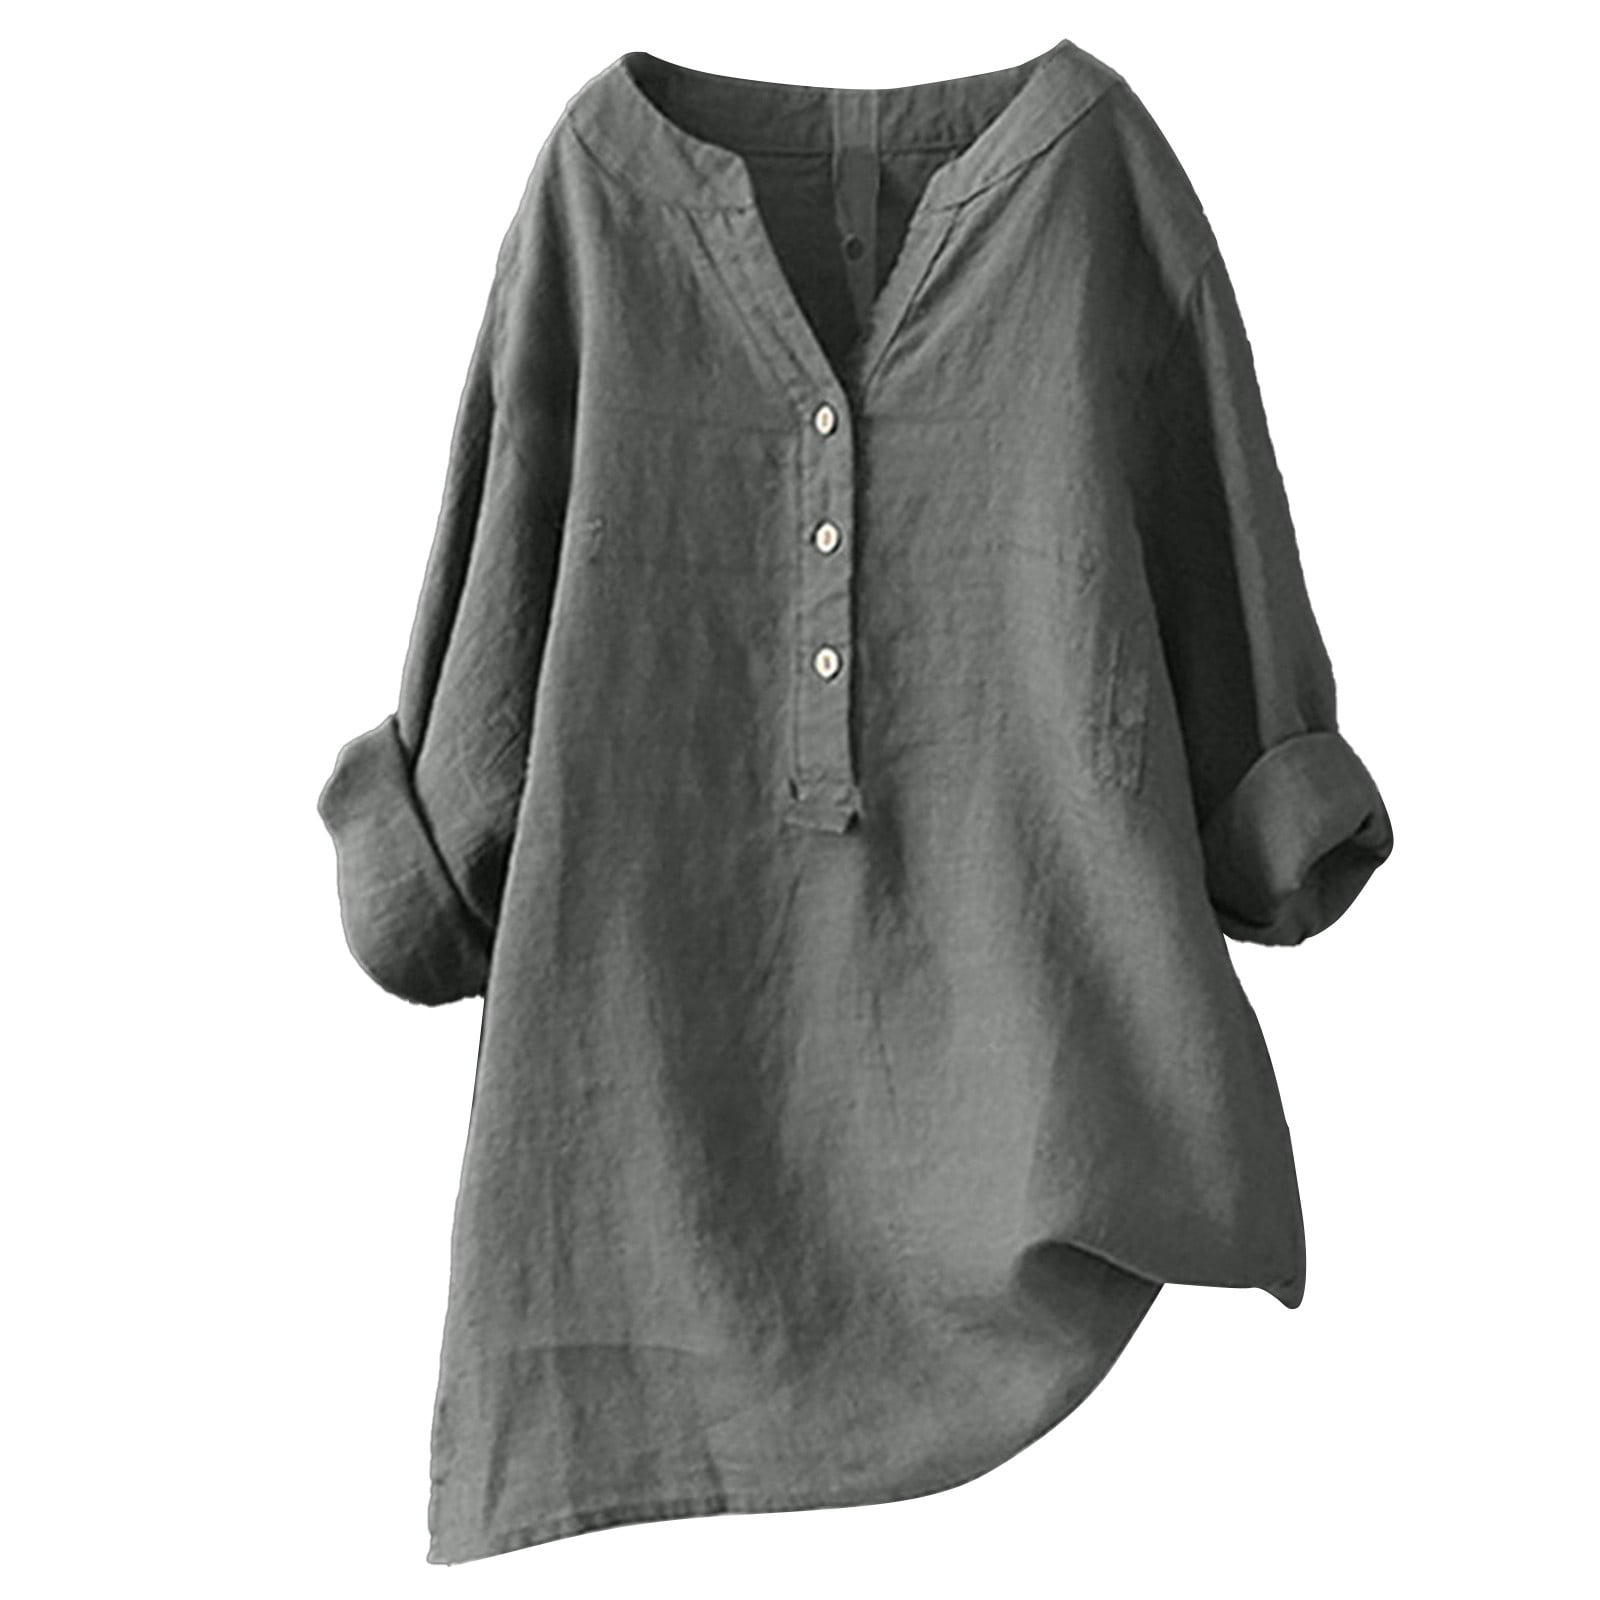 MPWEGNP Grey Plus Size Womens Tops Loose Blouse Tops Stand Collar ...